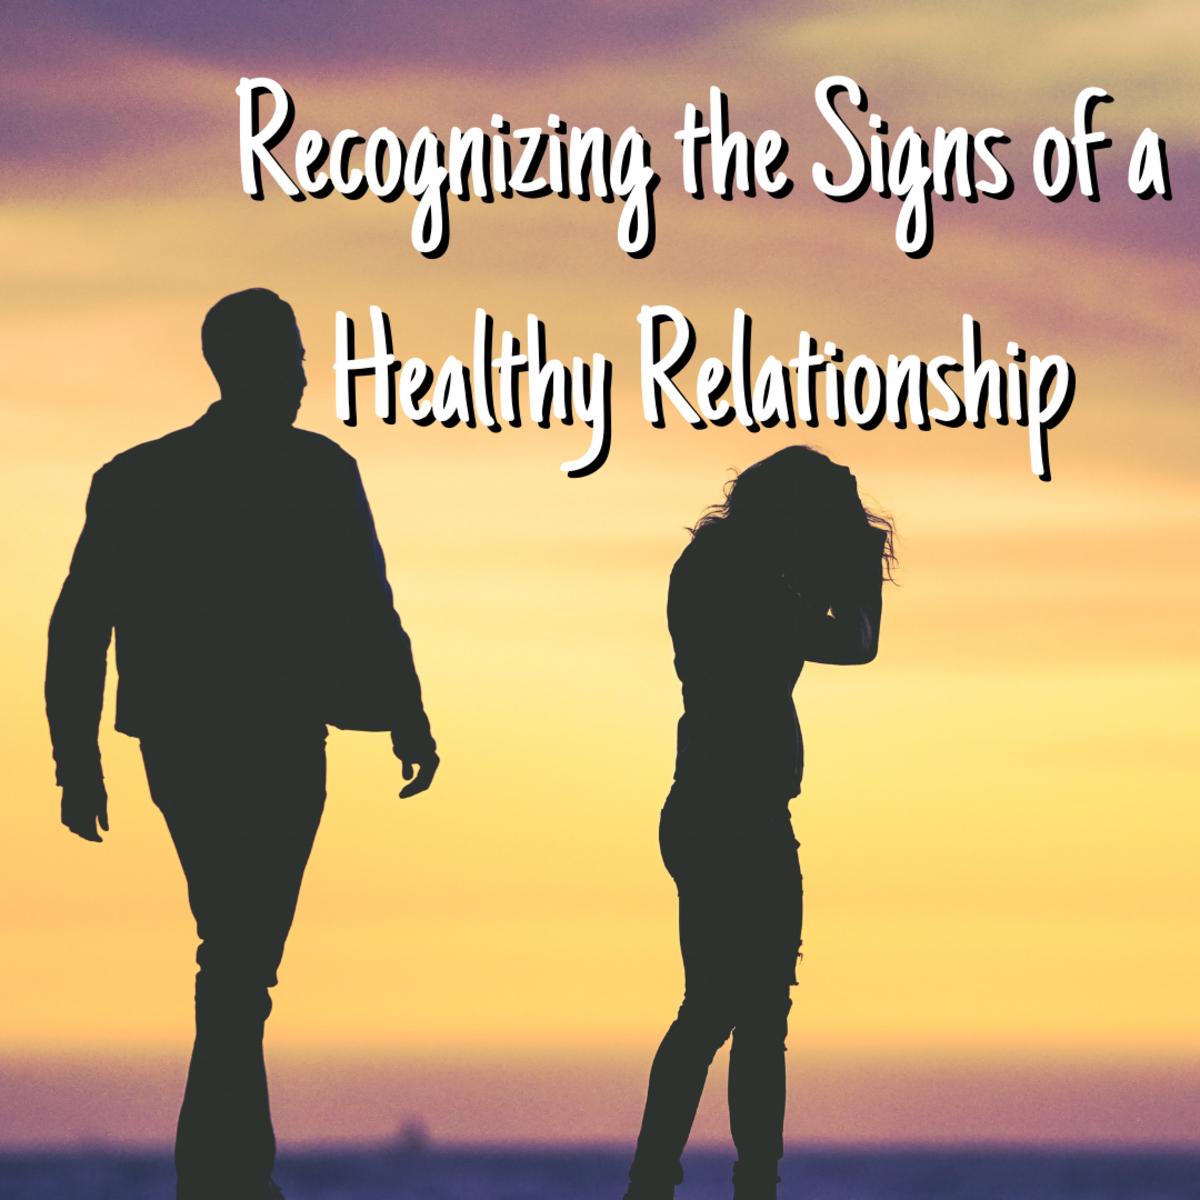 This article will help you understand and recognize the signs of healthy and unhealthy relationships.